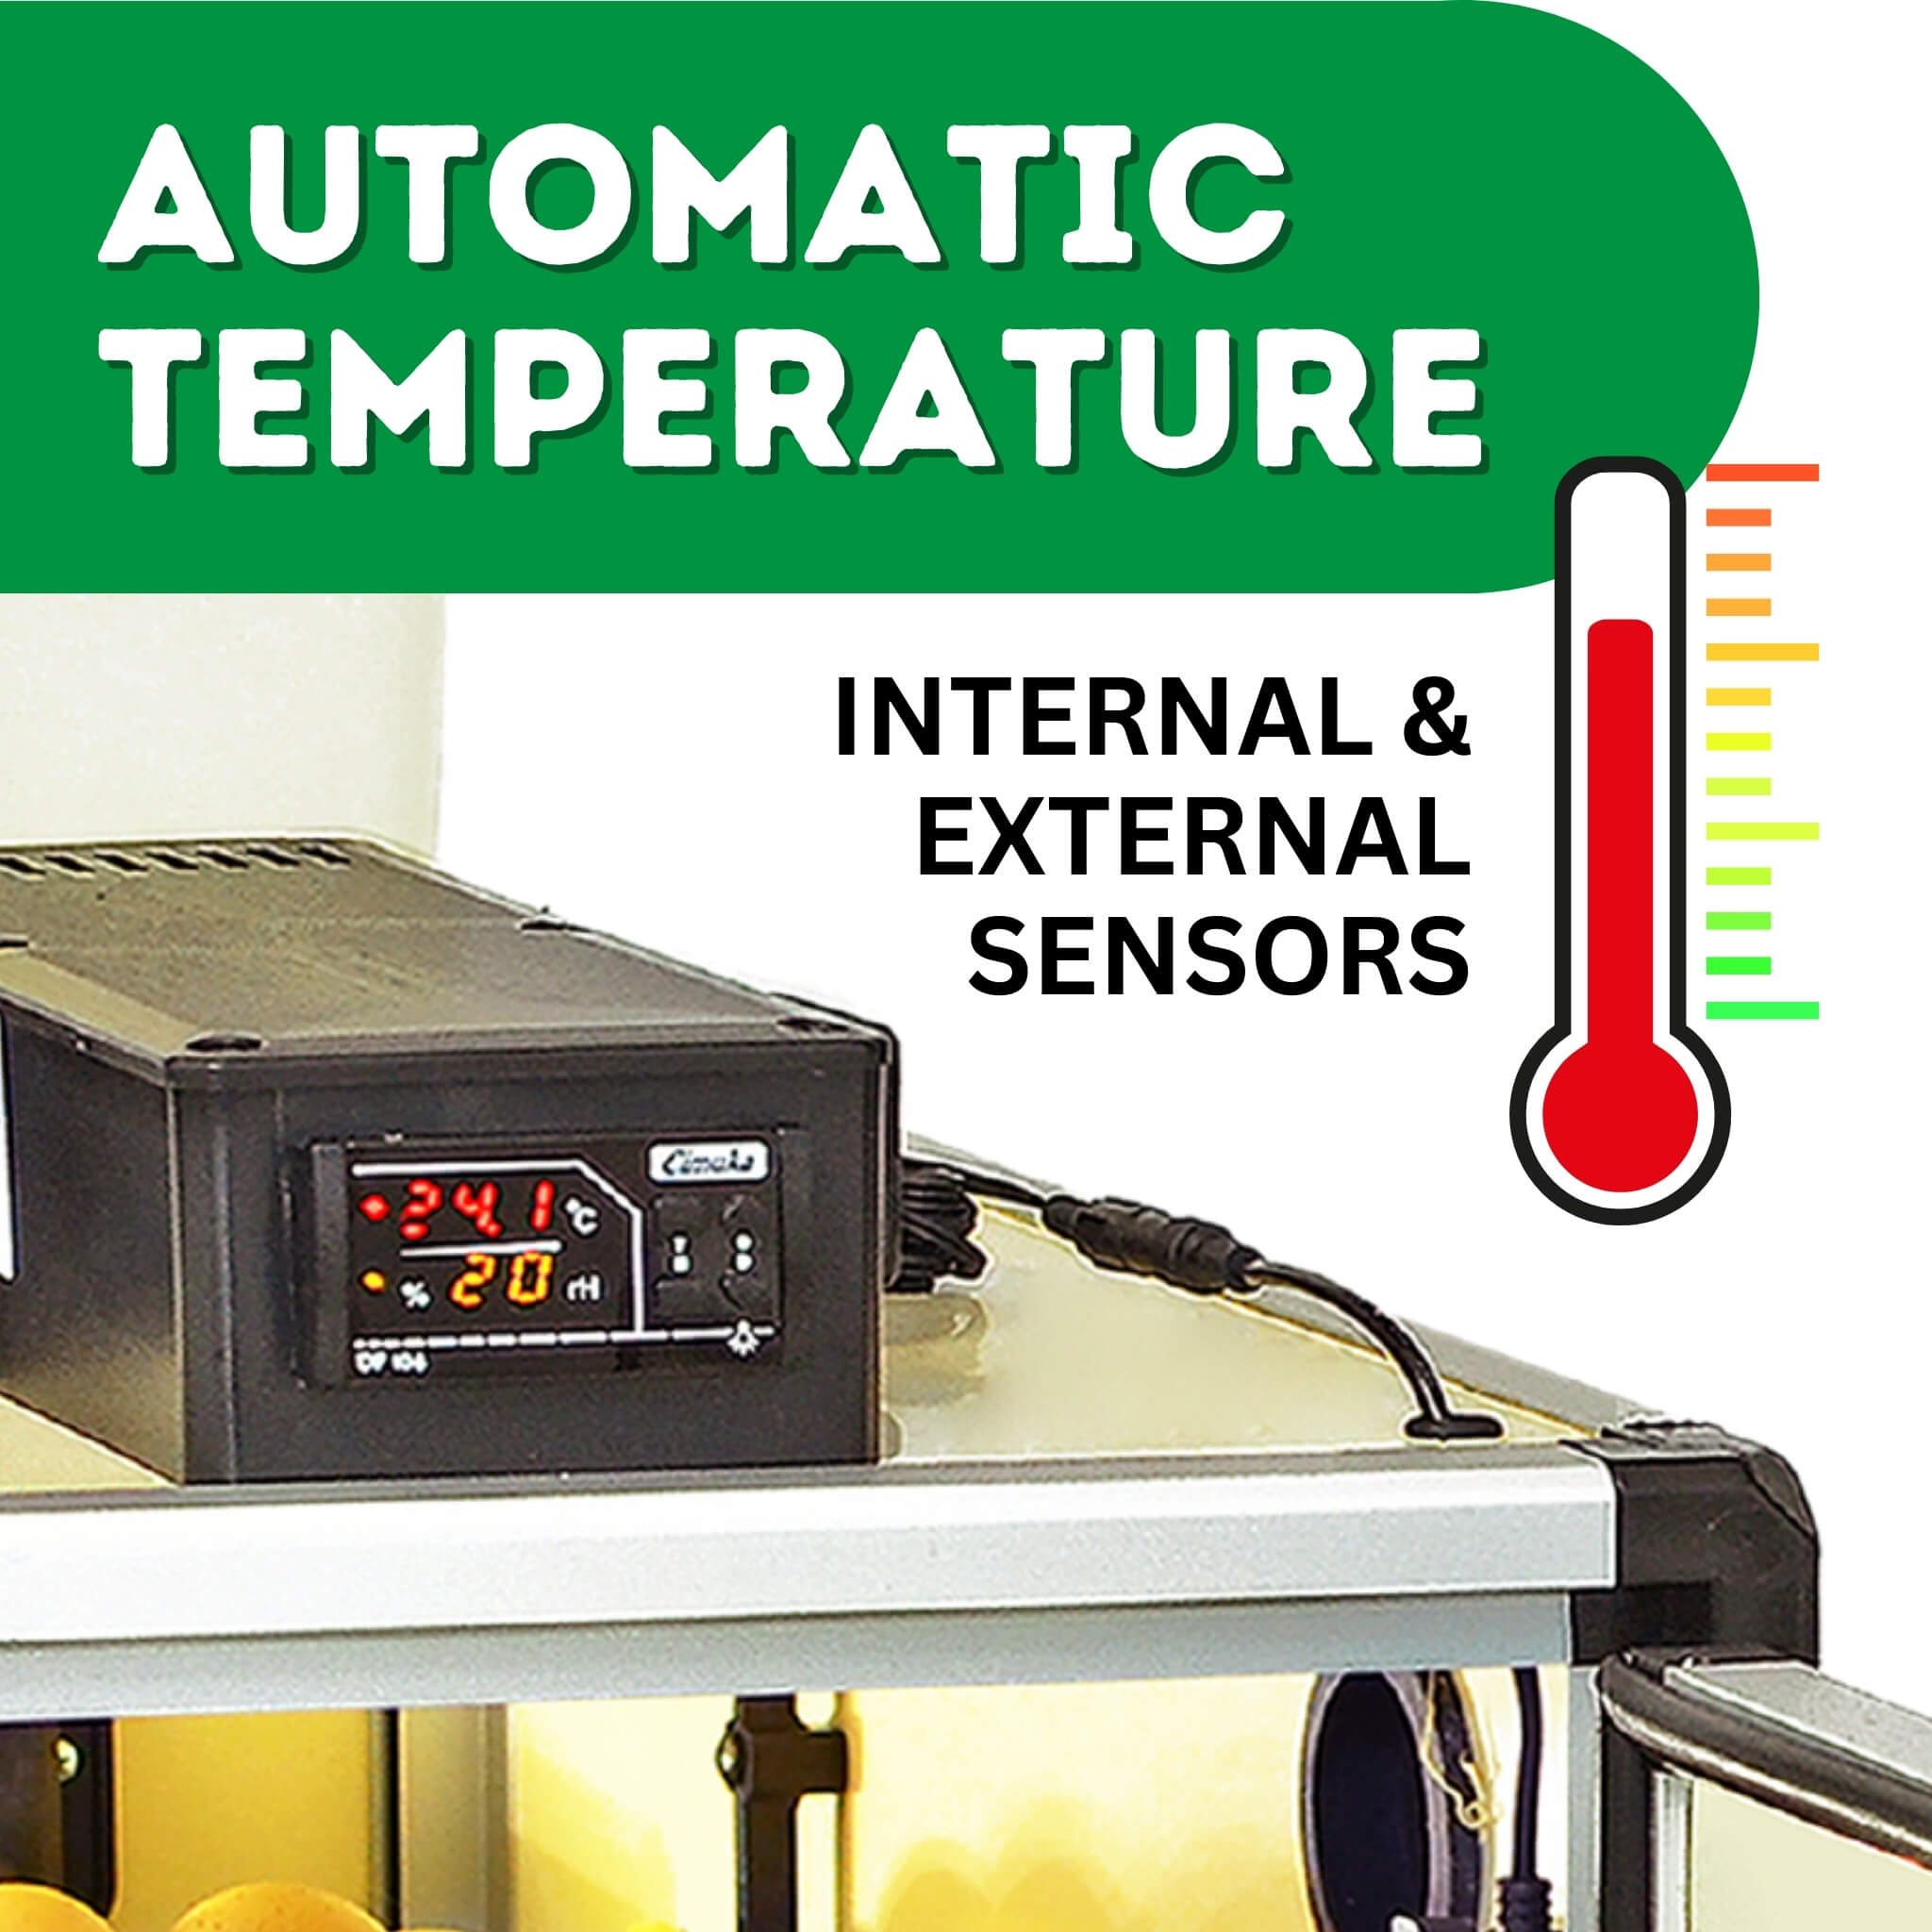 Hatching Time Cimuka CT120 Infographic showing top of open incubator showing digital control. Info graphic reads Automatic temperature. Internal and external sensors.